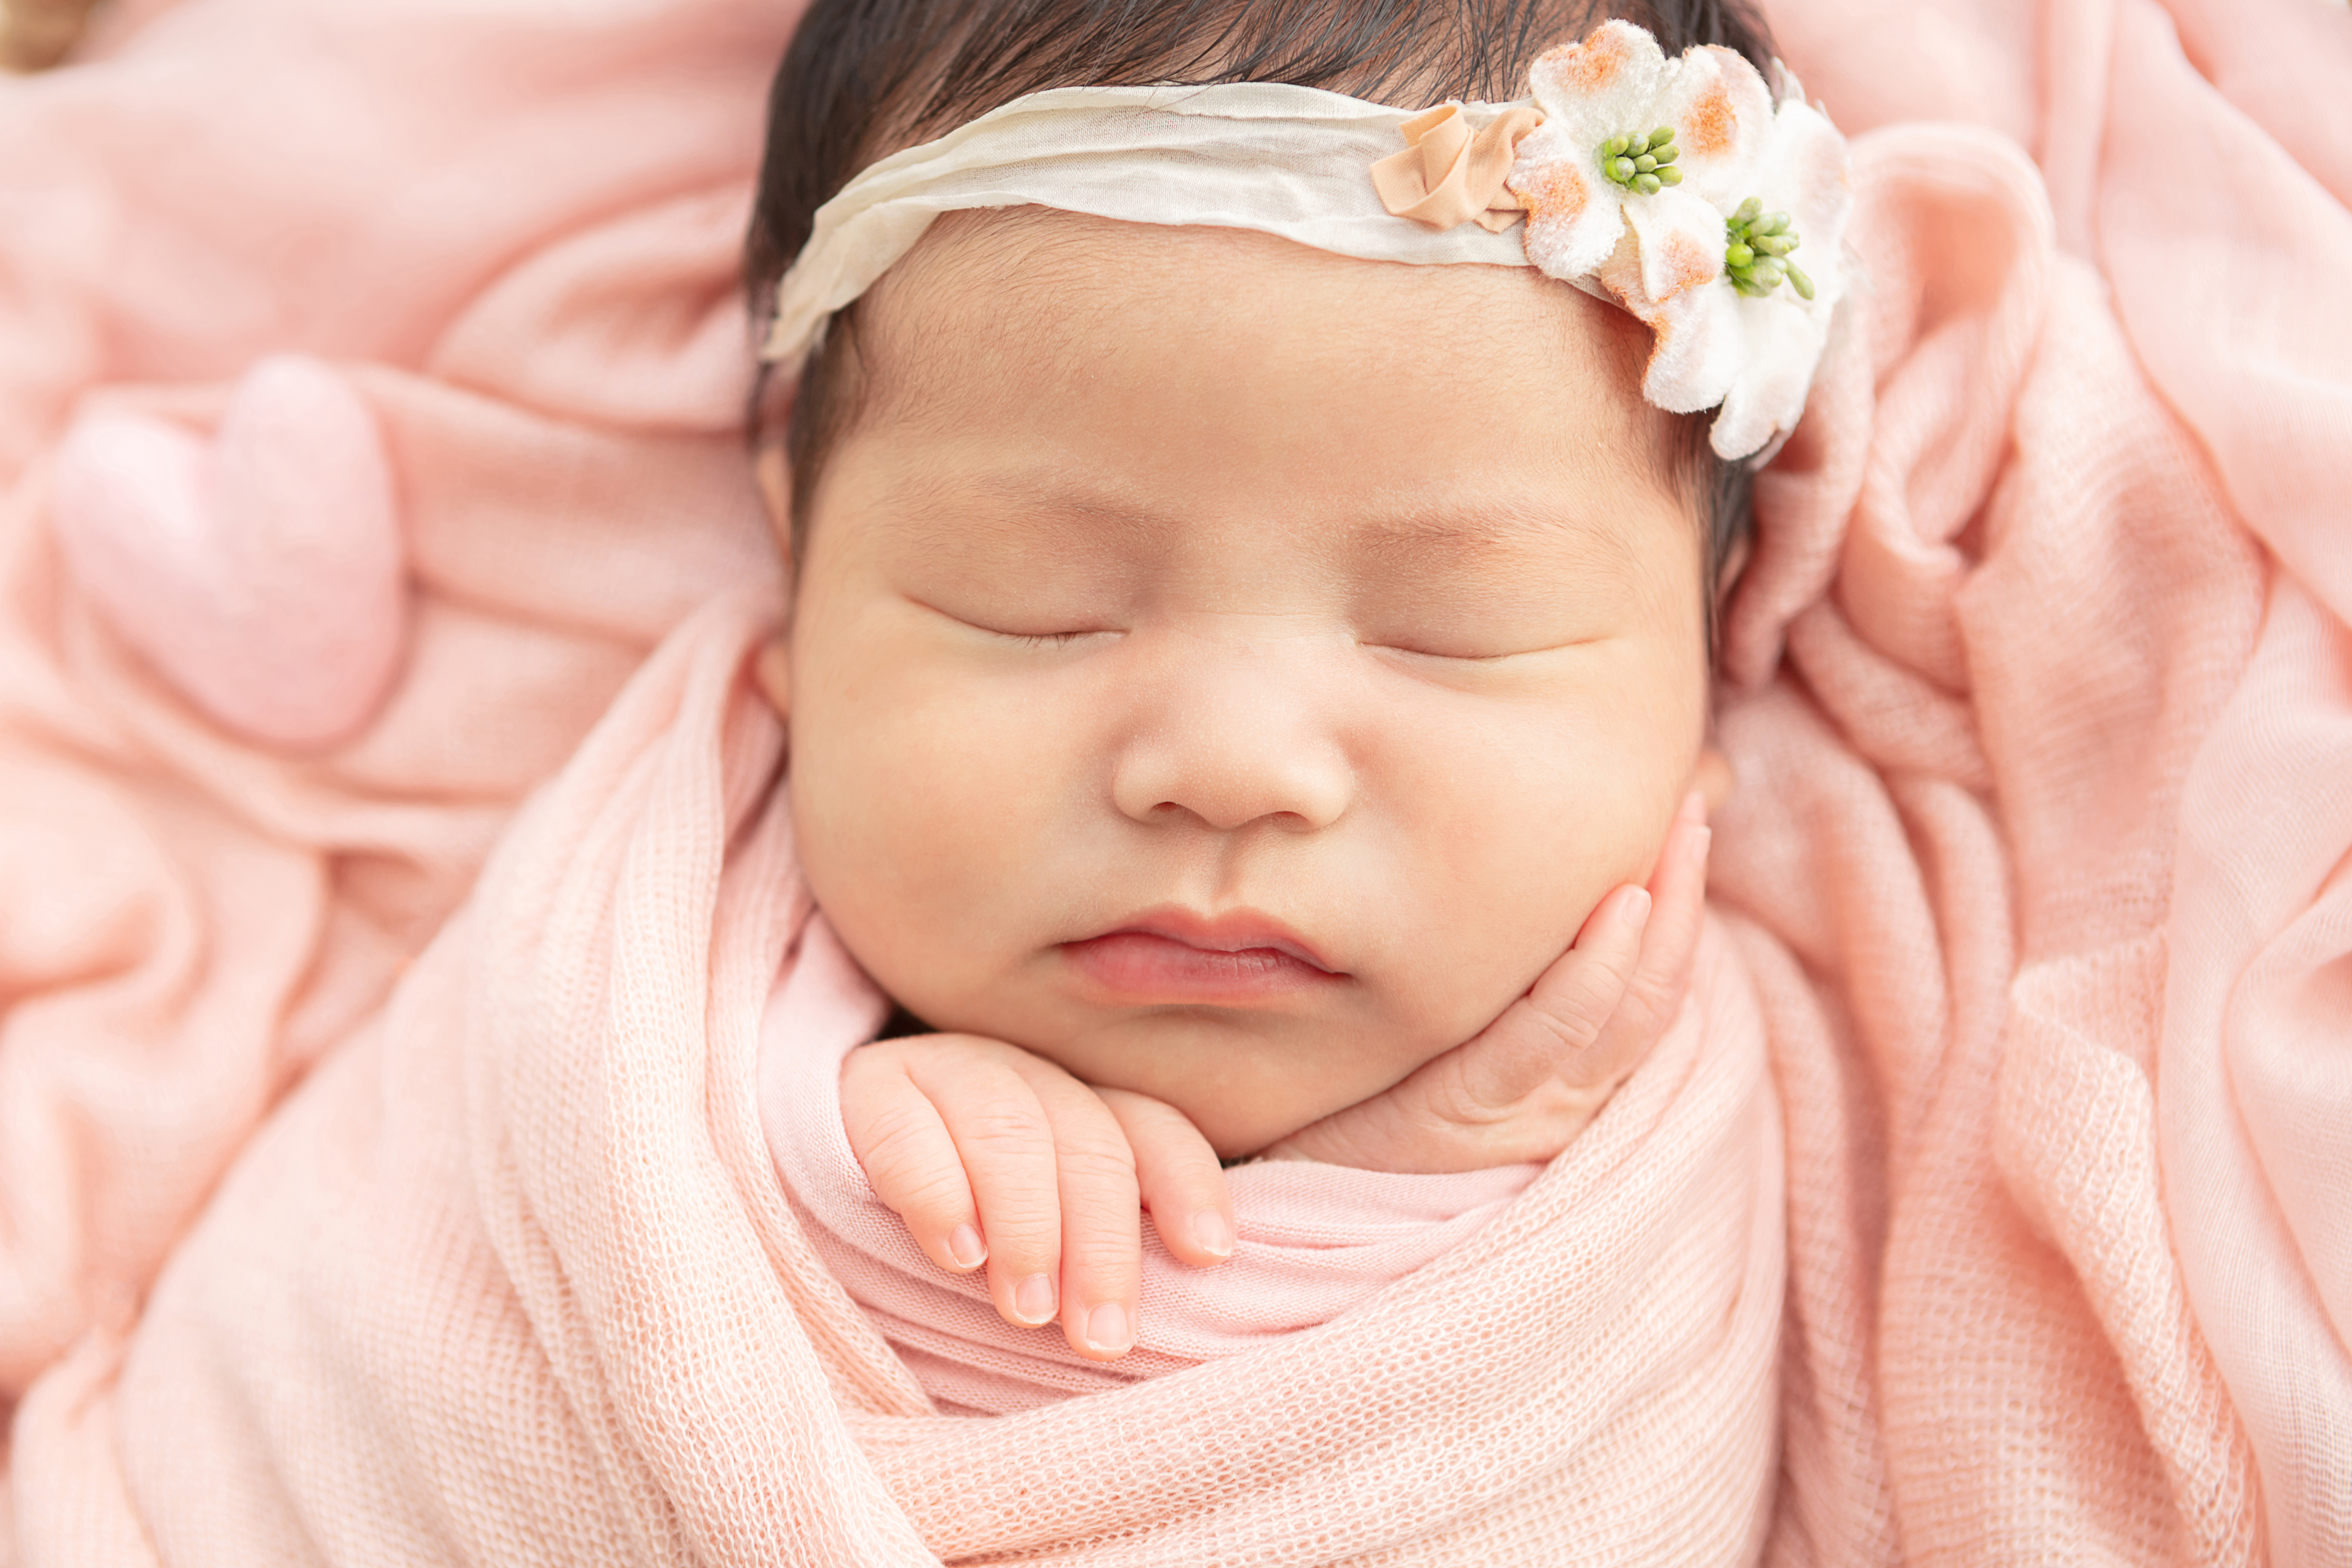 sweet newborn baby girl wearing a muslin floral headband, with her hands delicately tucked in a peachy pink swaddle blanket